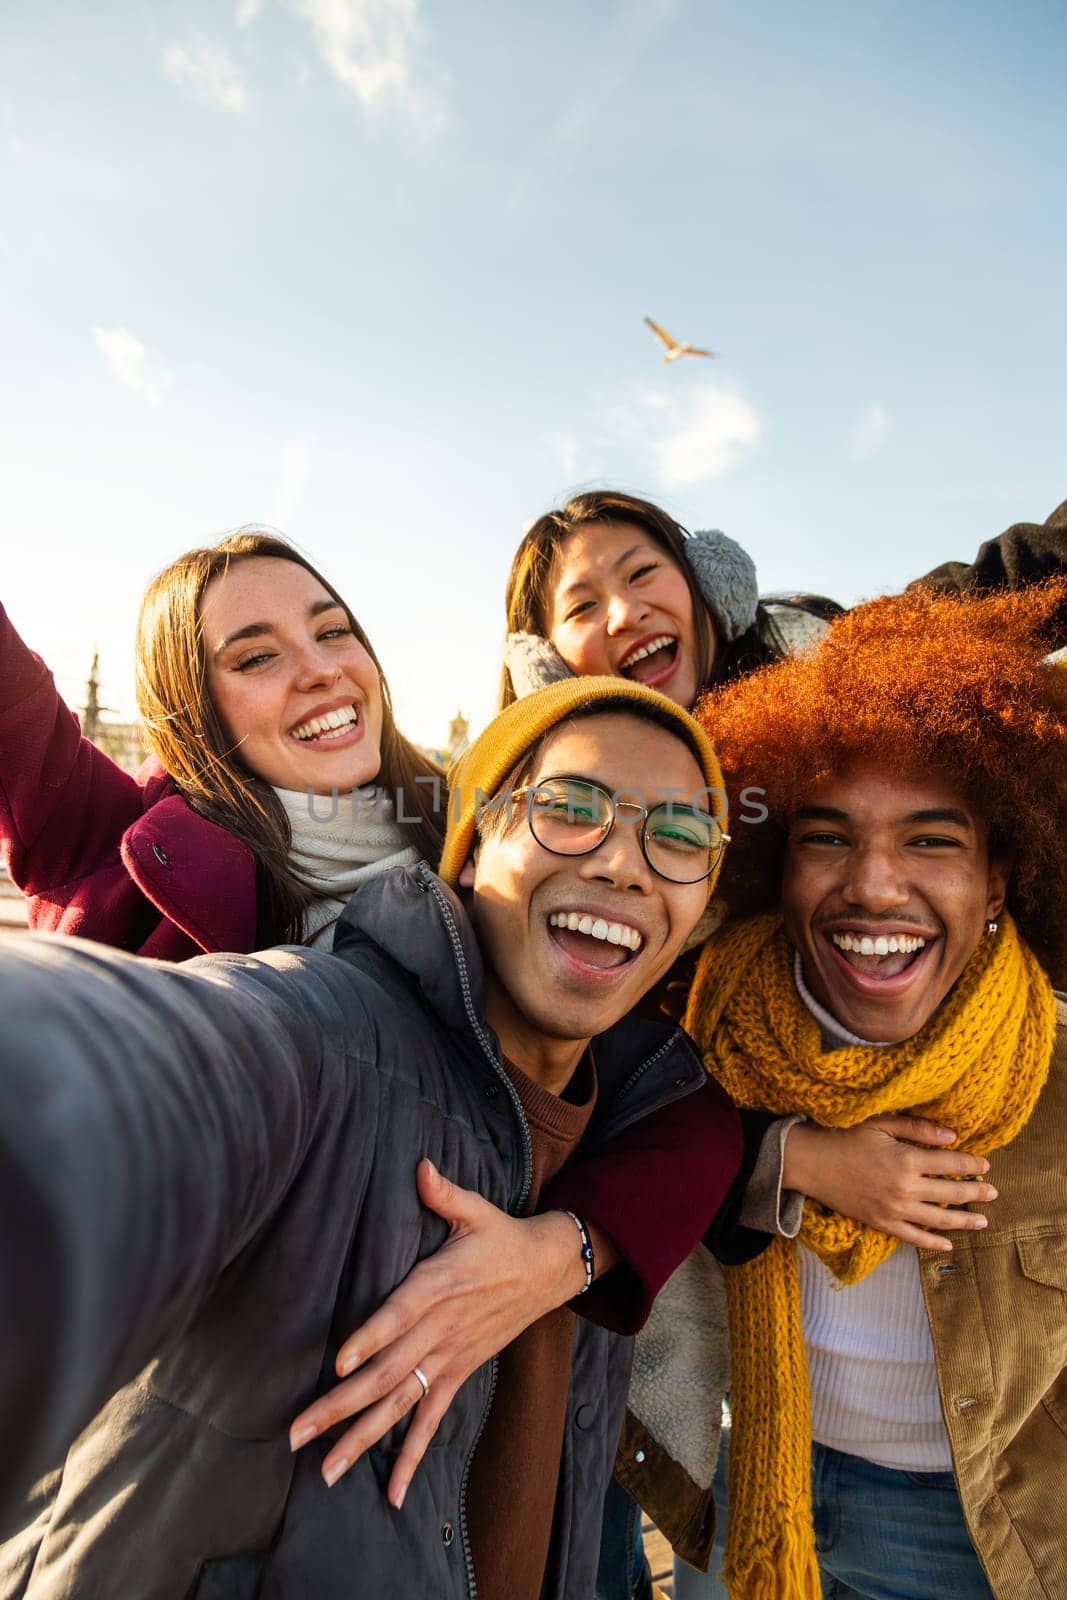 Selfie of multiracial happy friends enjoying winter day outdoors. Happy people looking at camera. Vertical. Copy space. by Hoverstock